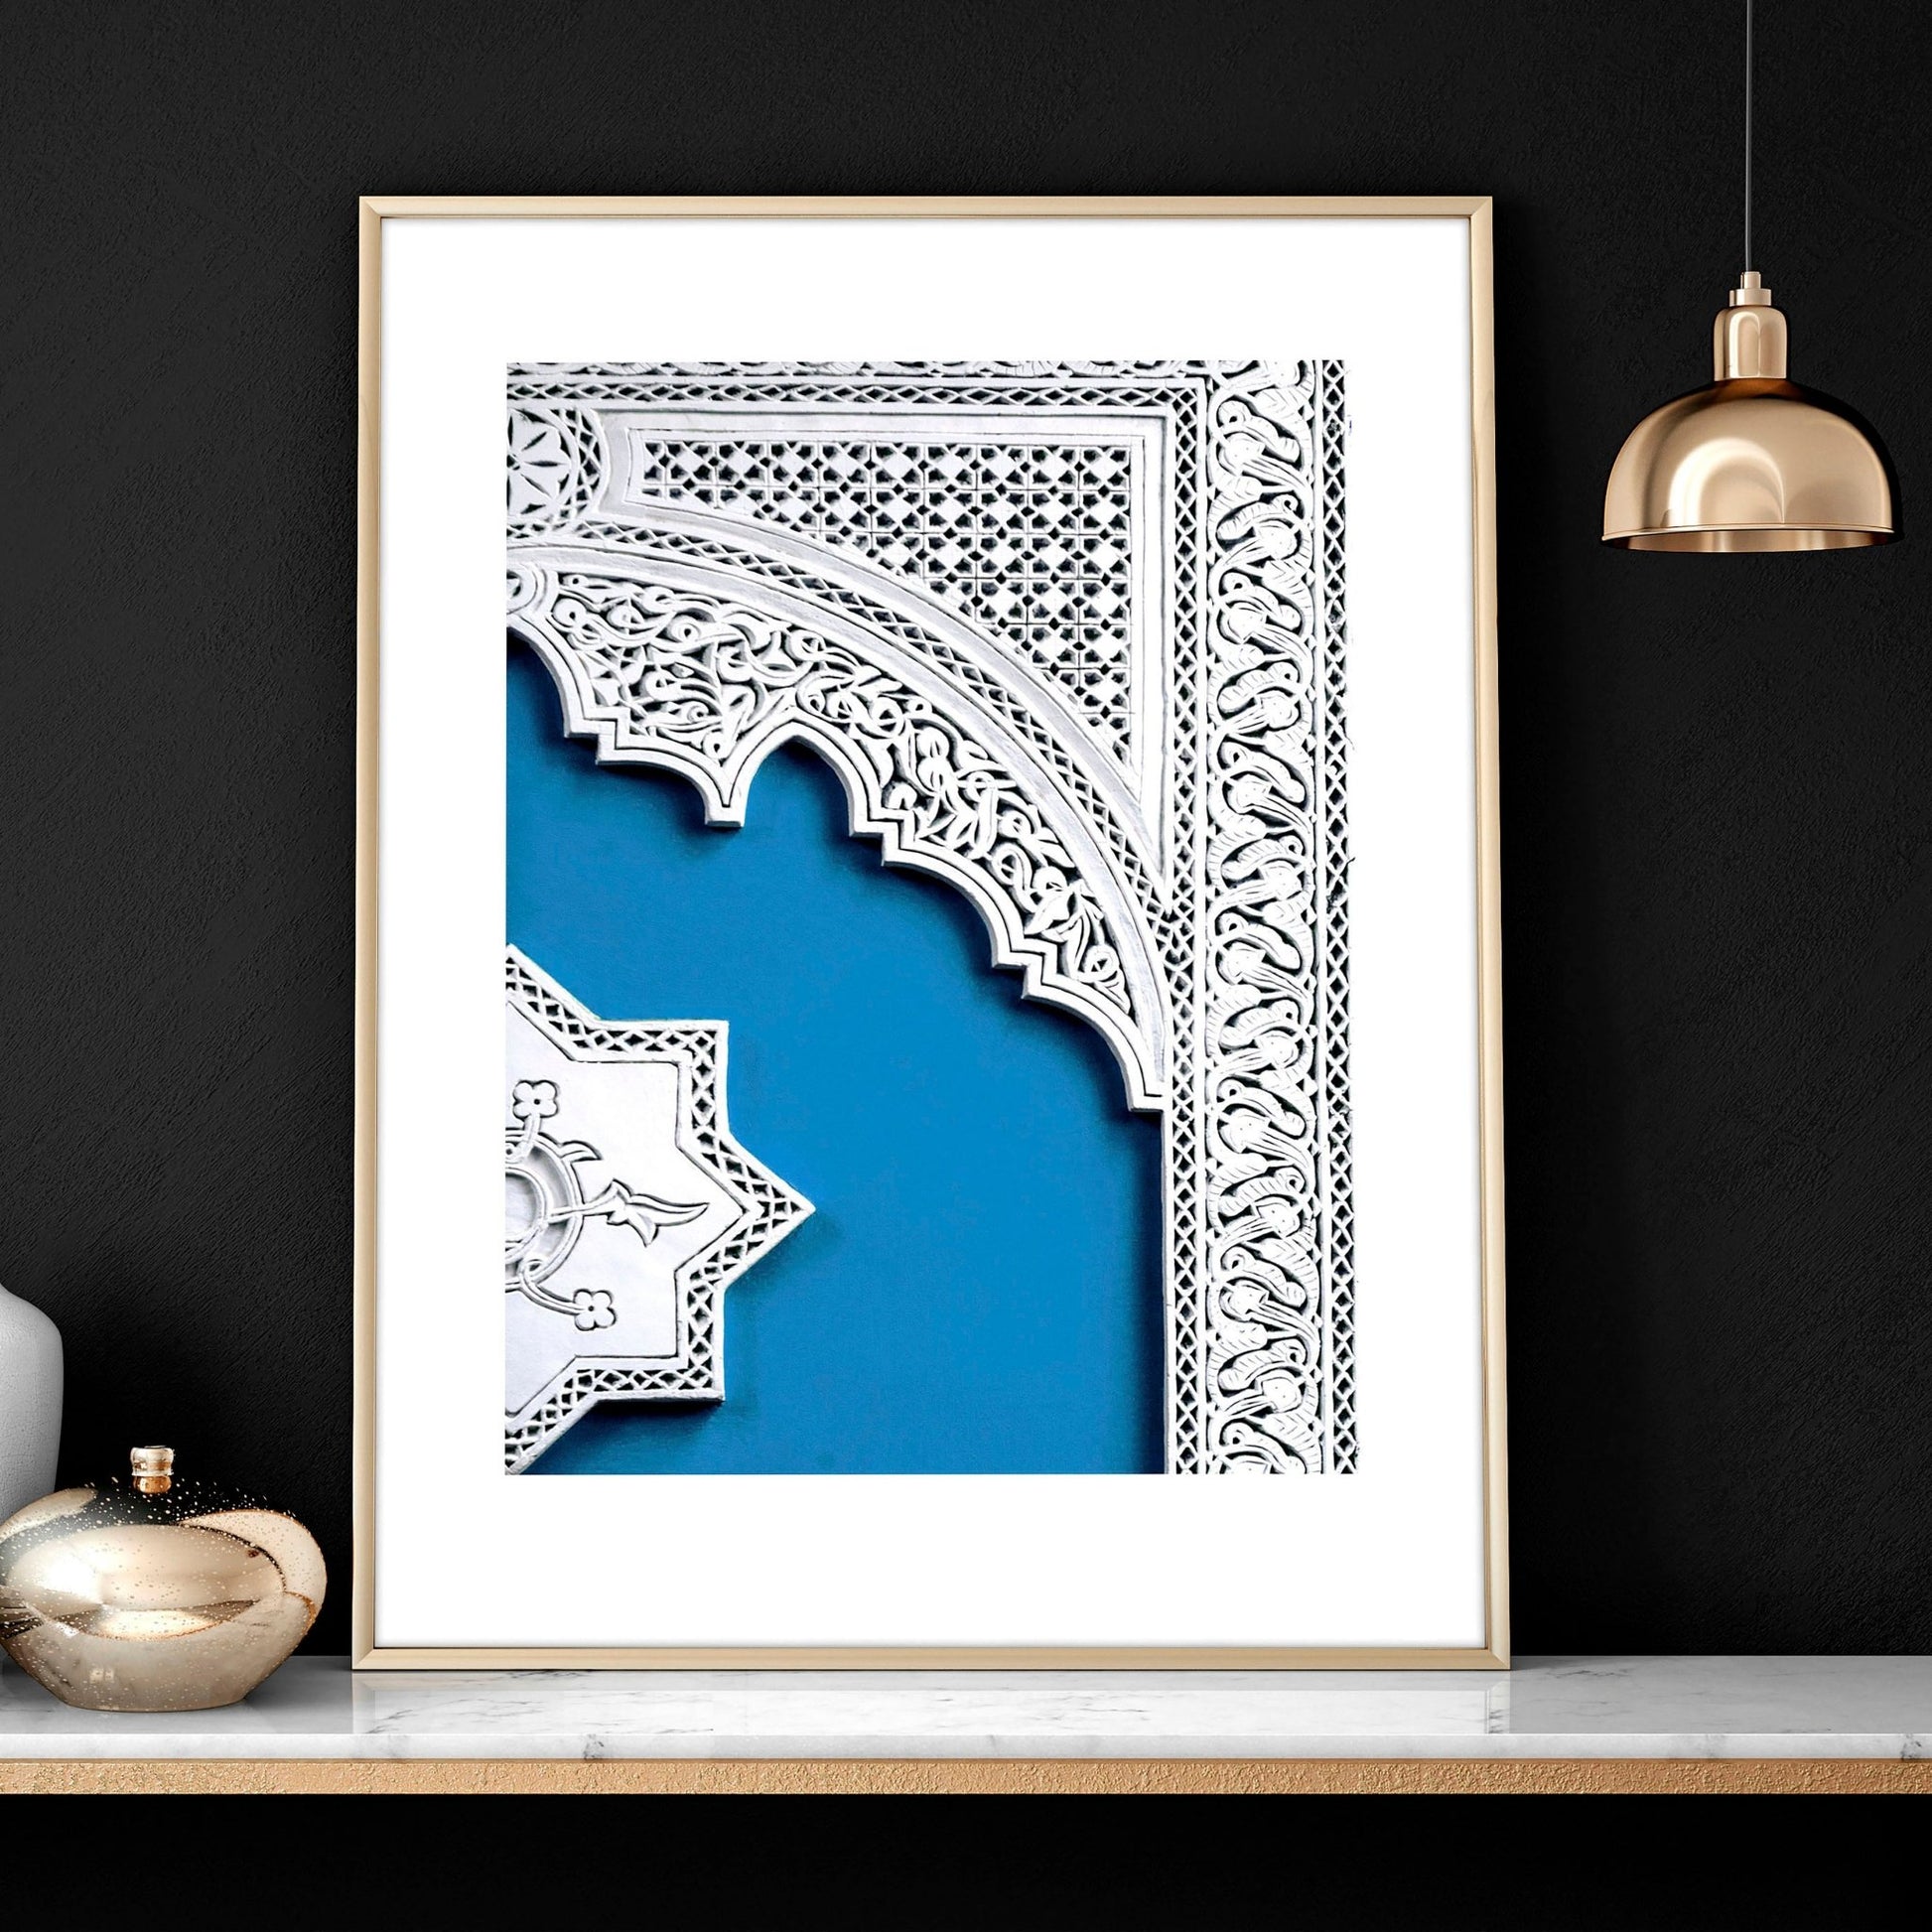 Islamic decor for home | set of 3 bedroom wall art